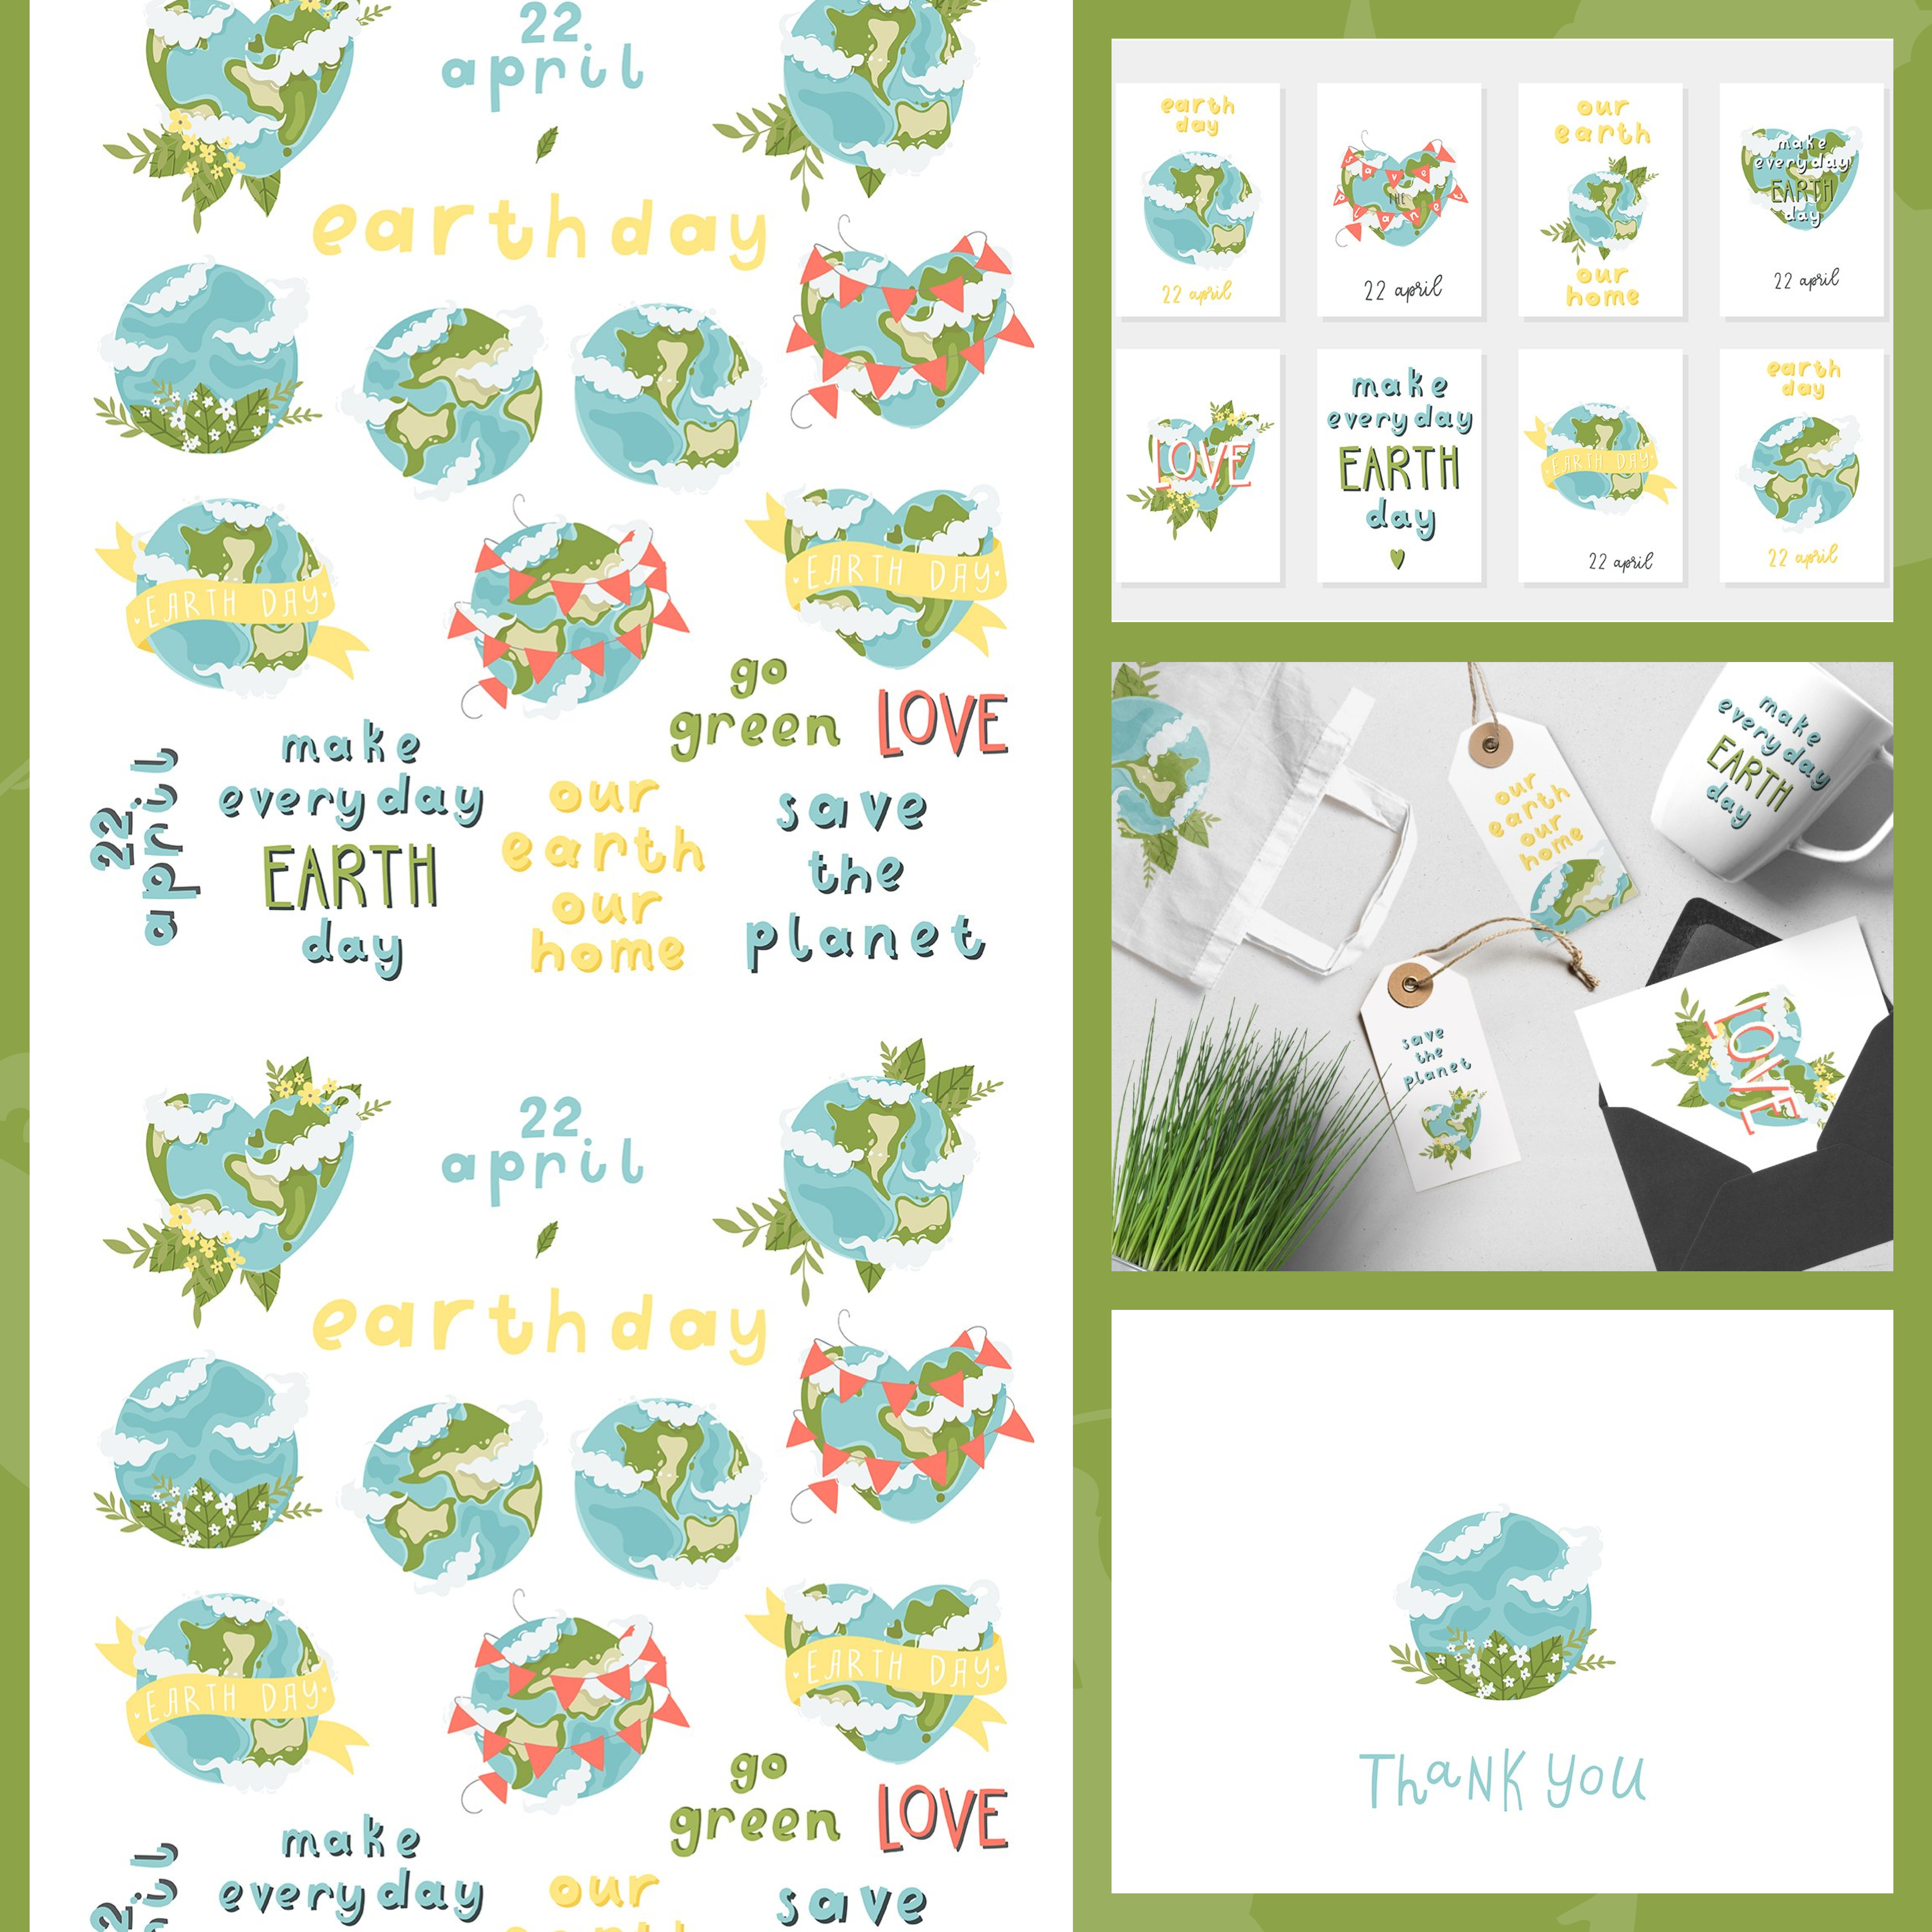 Images with earth day set.